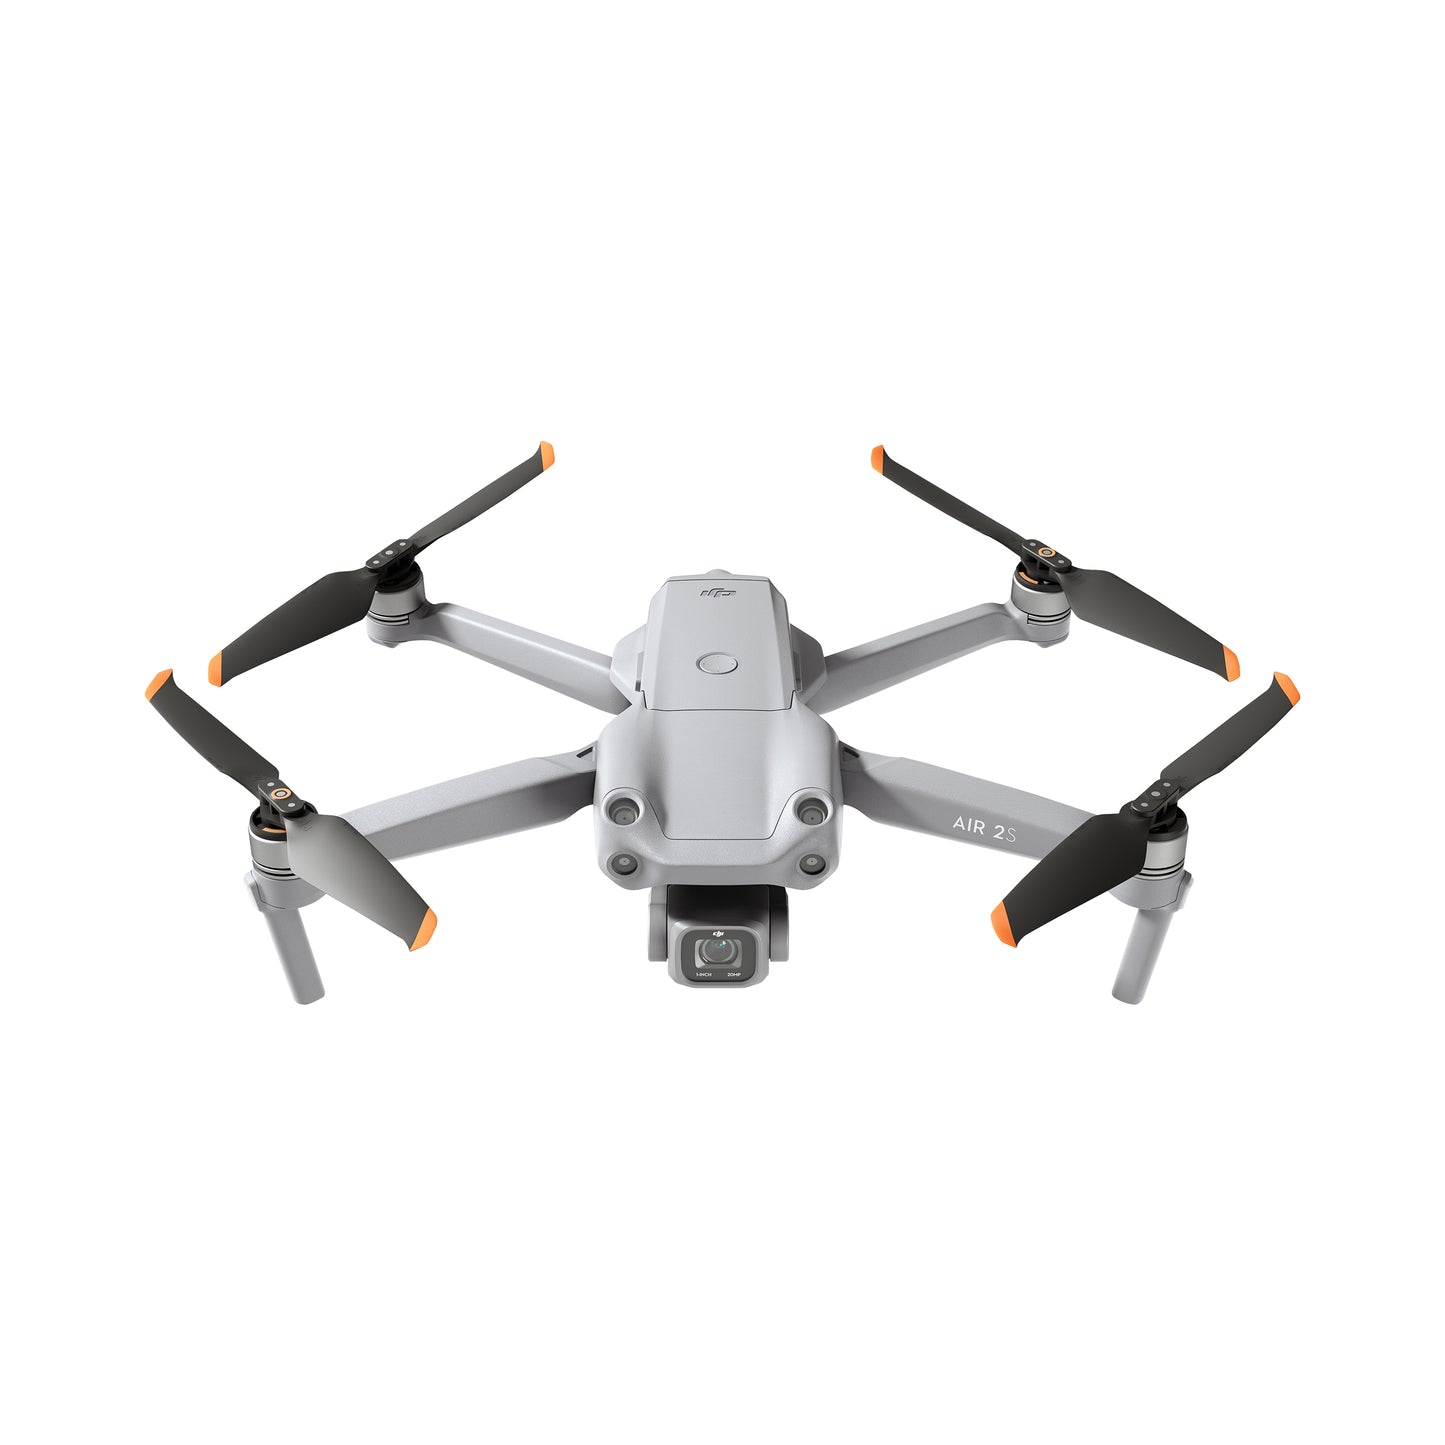 DJI Air 2S 5.4K 30fps Standard / Fly More Combo UHD Professional Drone with 31-Minutes Flight Time ActiveTrack 4.0, Ocusync 3.0, APAS 4.0 and MasterShots Function